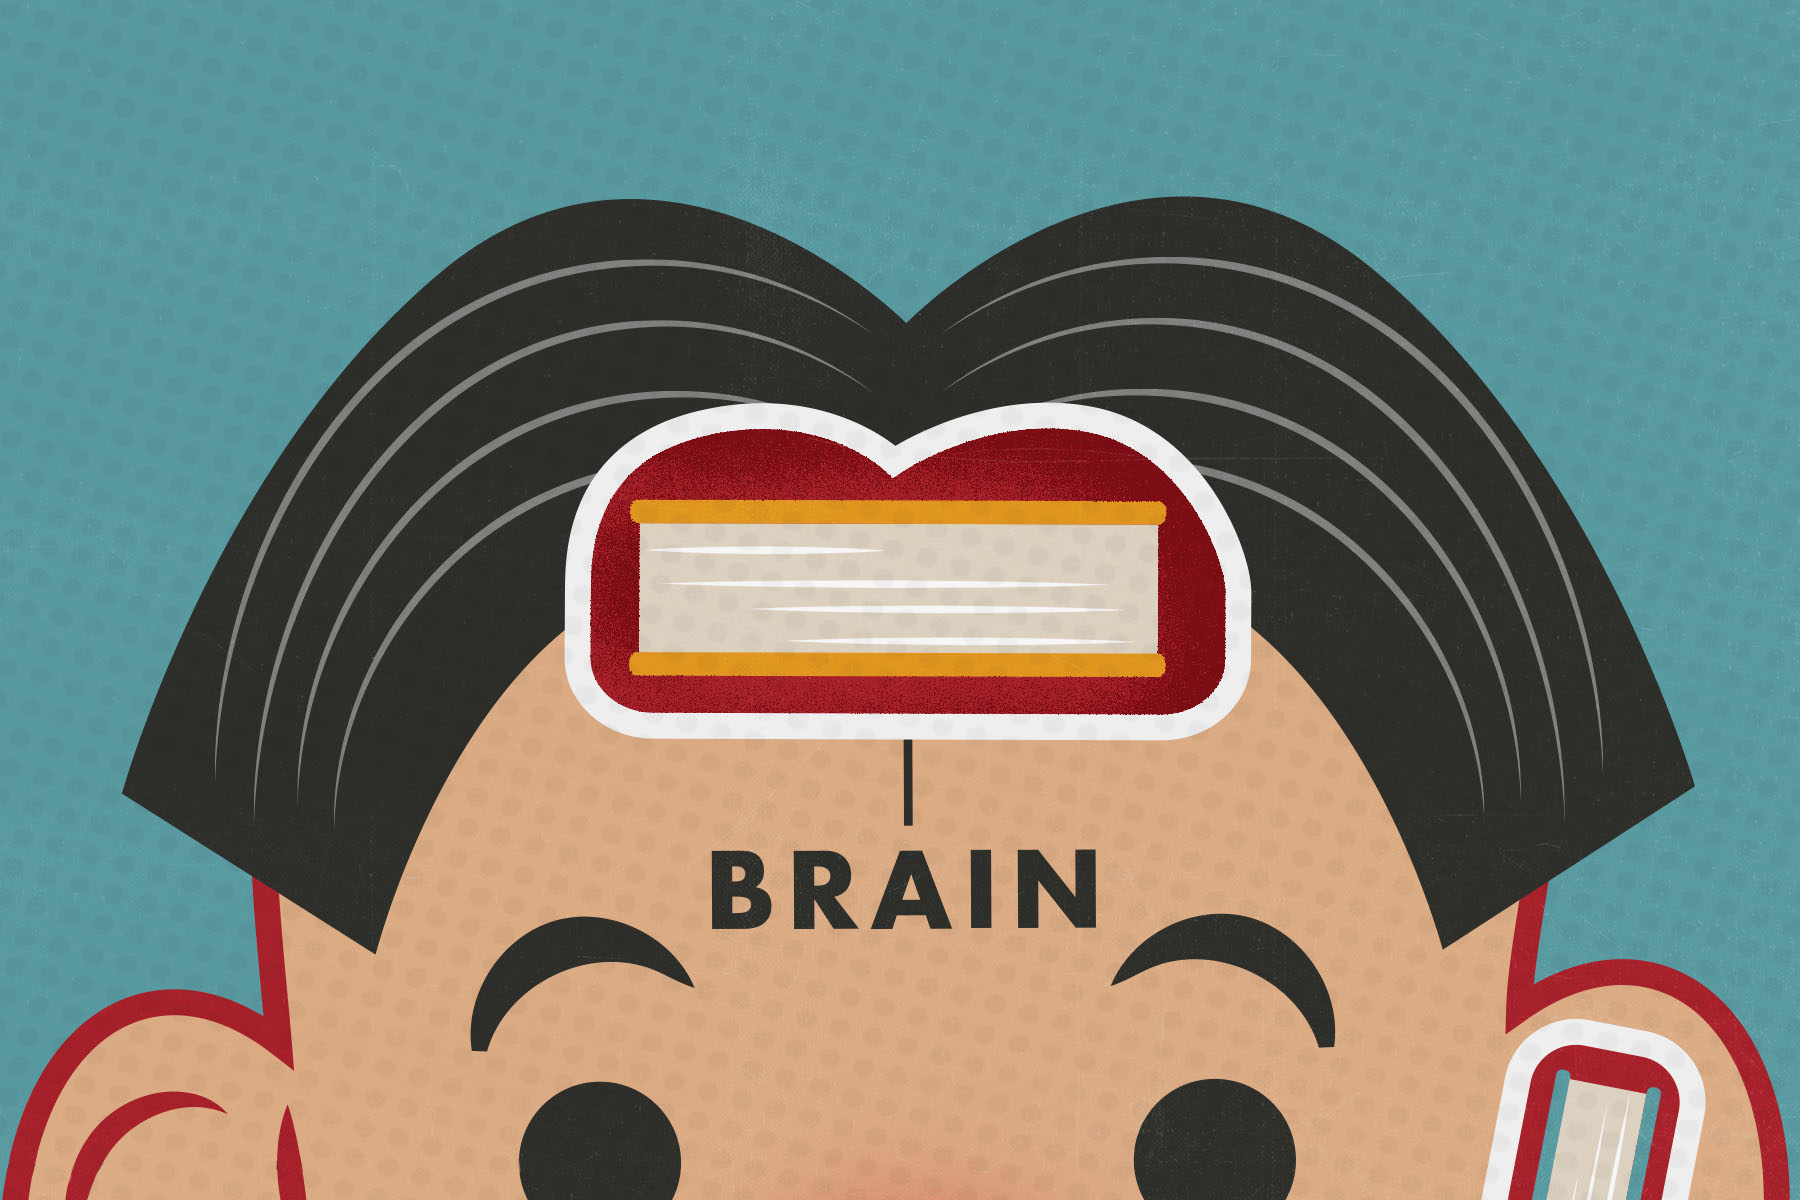 A boardgame-style illustration of the brain